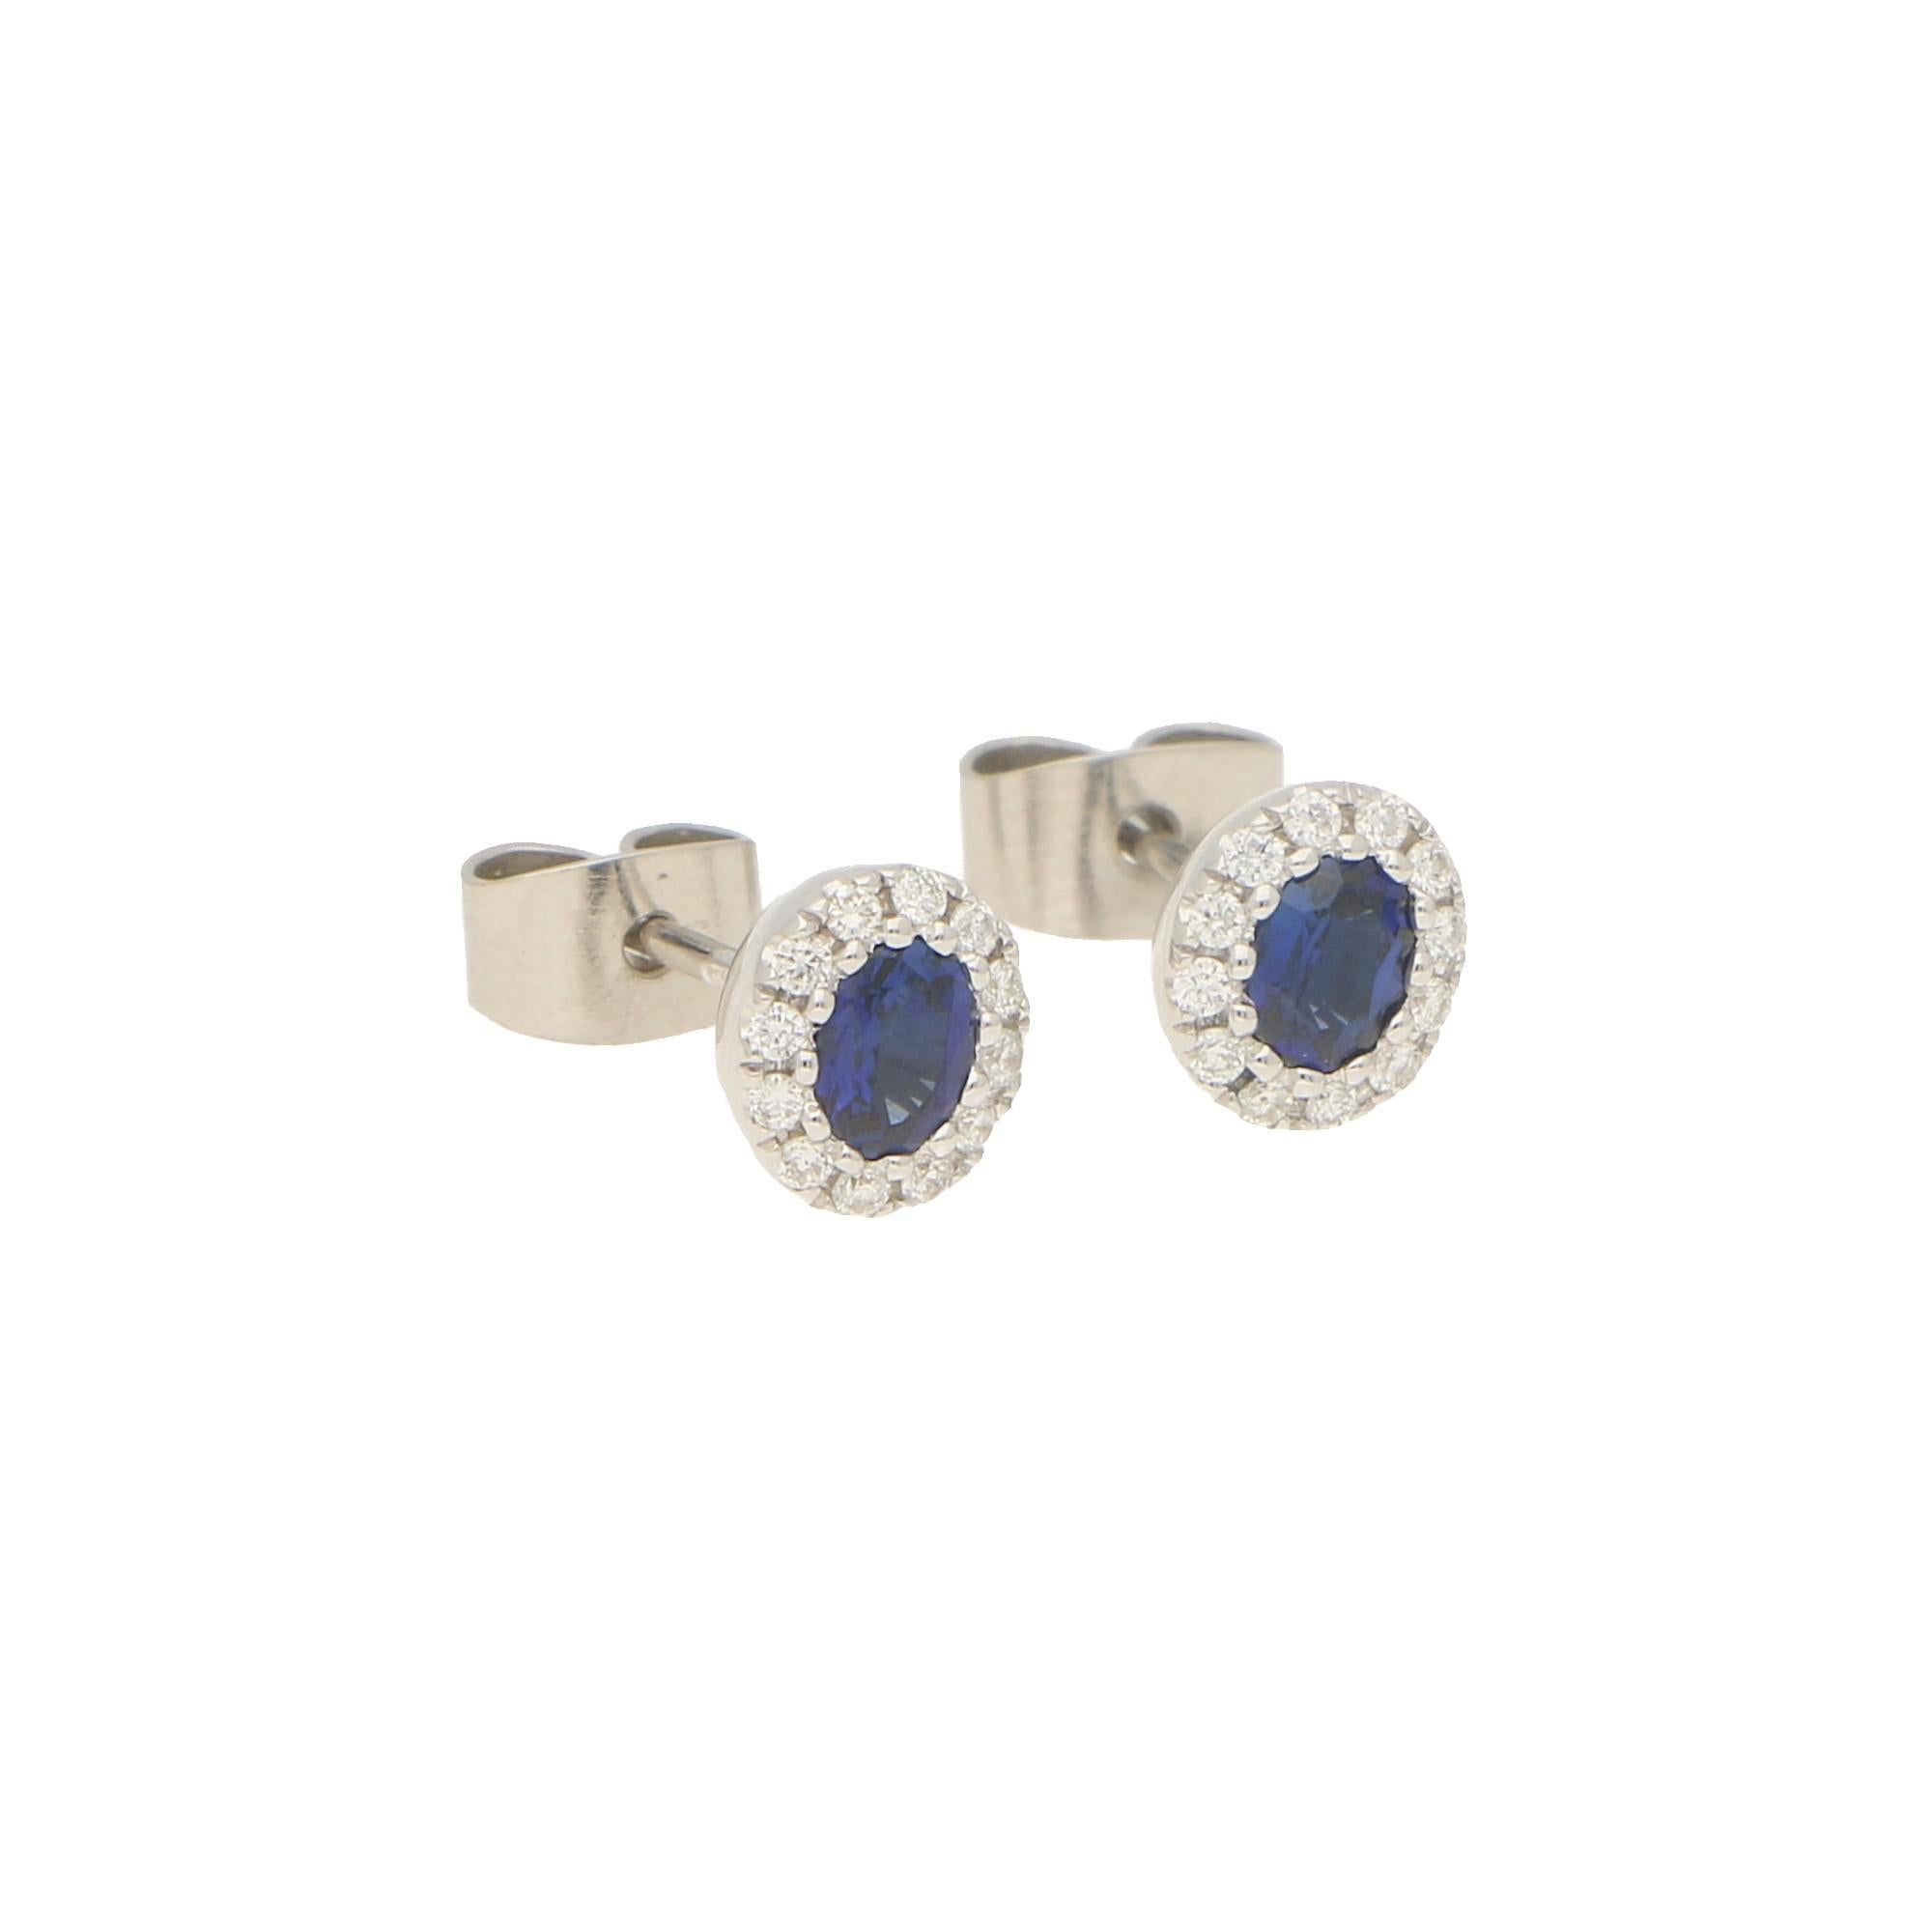 A lovely pair of petite sapphire and diamond oval halo earrings set in 18k white gold. 

Each earring centrally features a royal blue coloured oval shaped sapphire surrounded by a halo of 12 round brilliant-cut diamonds. All of the stones are set to